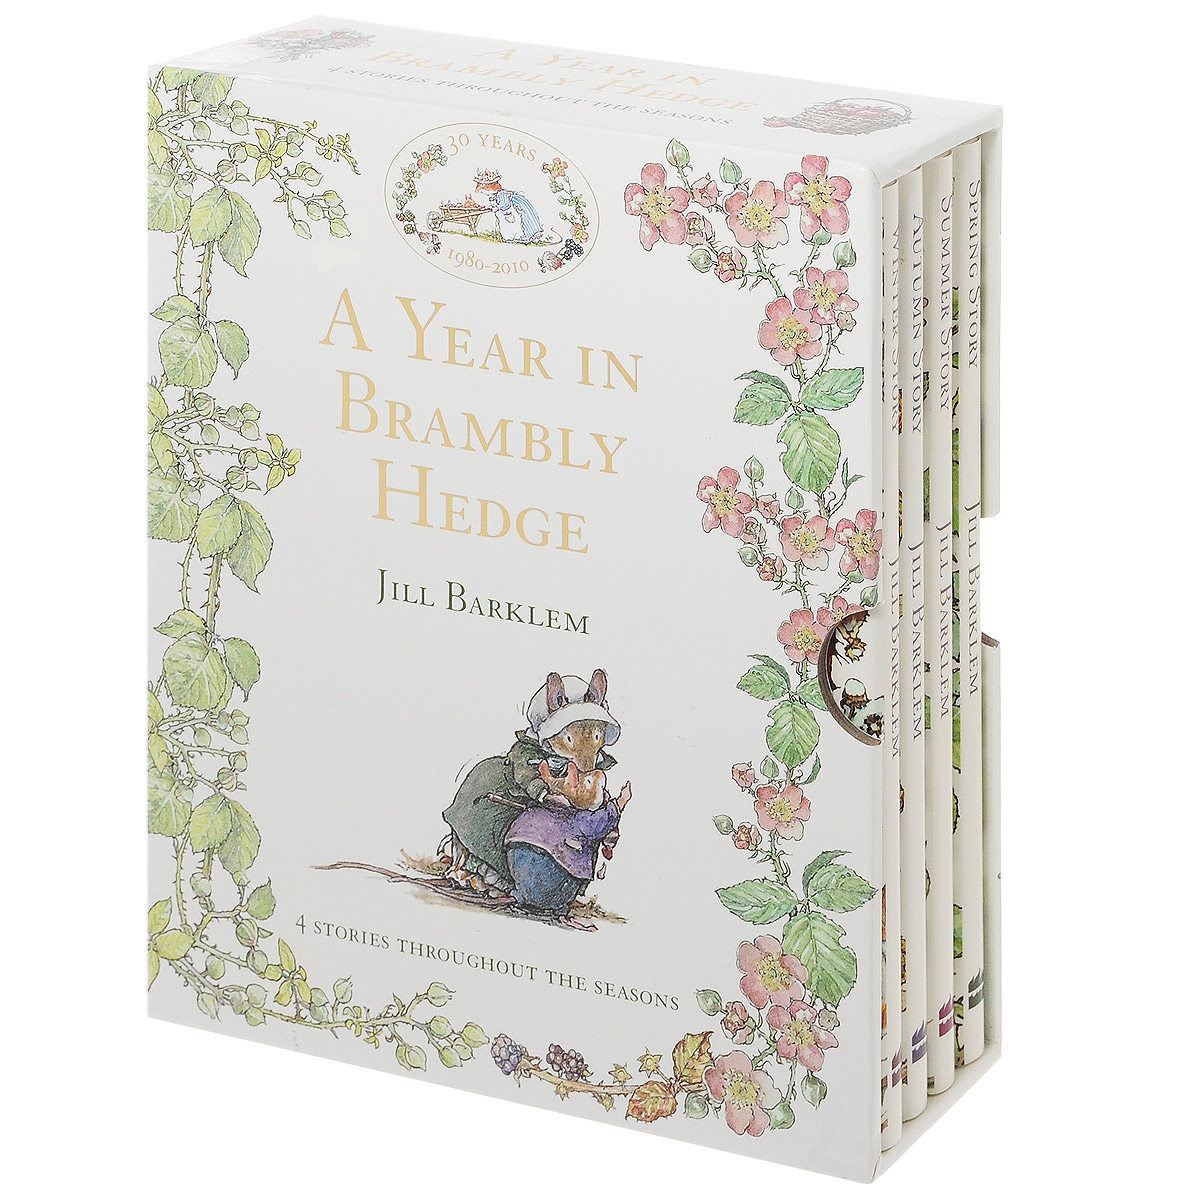 A Year in Brambly Hedge (4 Stories)